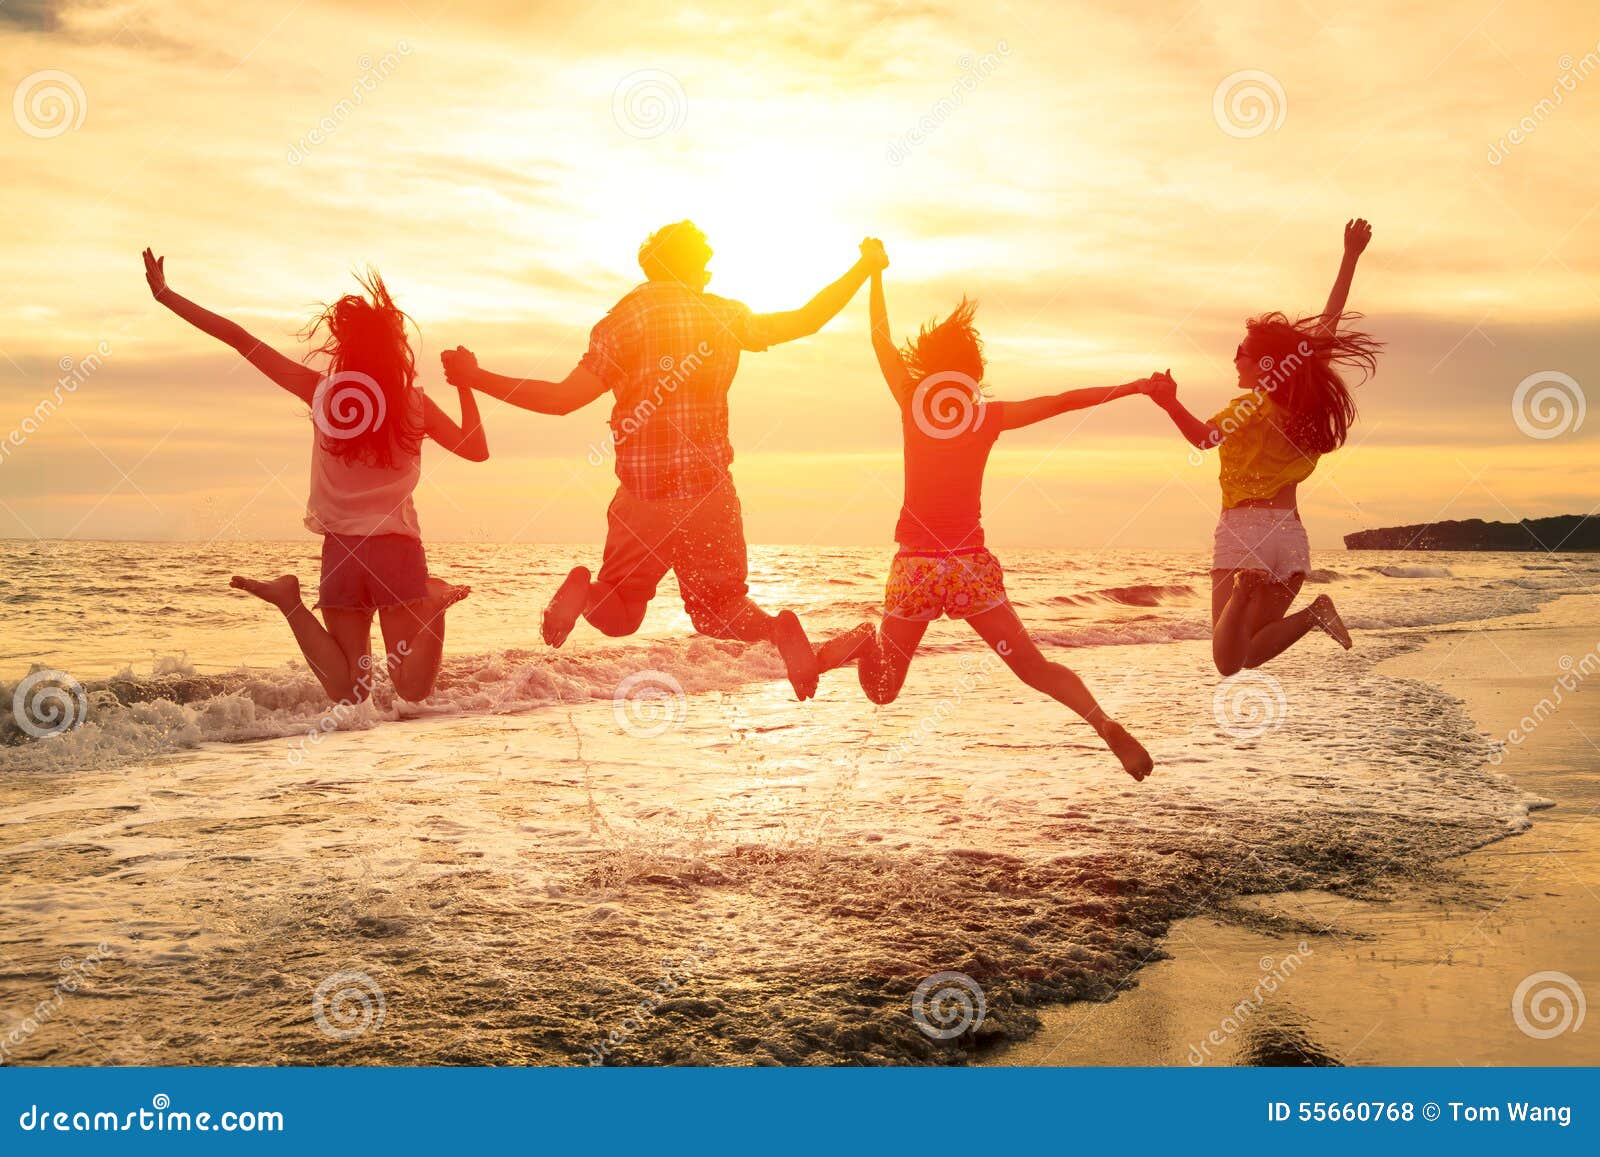 happy young people jumping on the beach